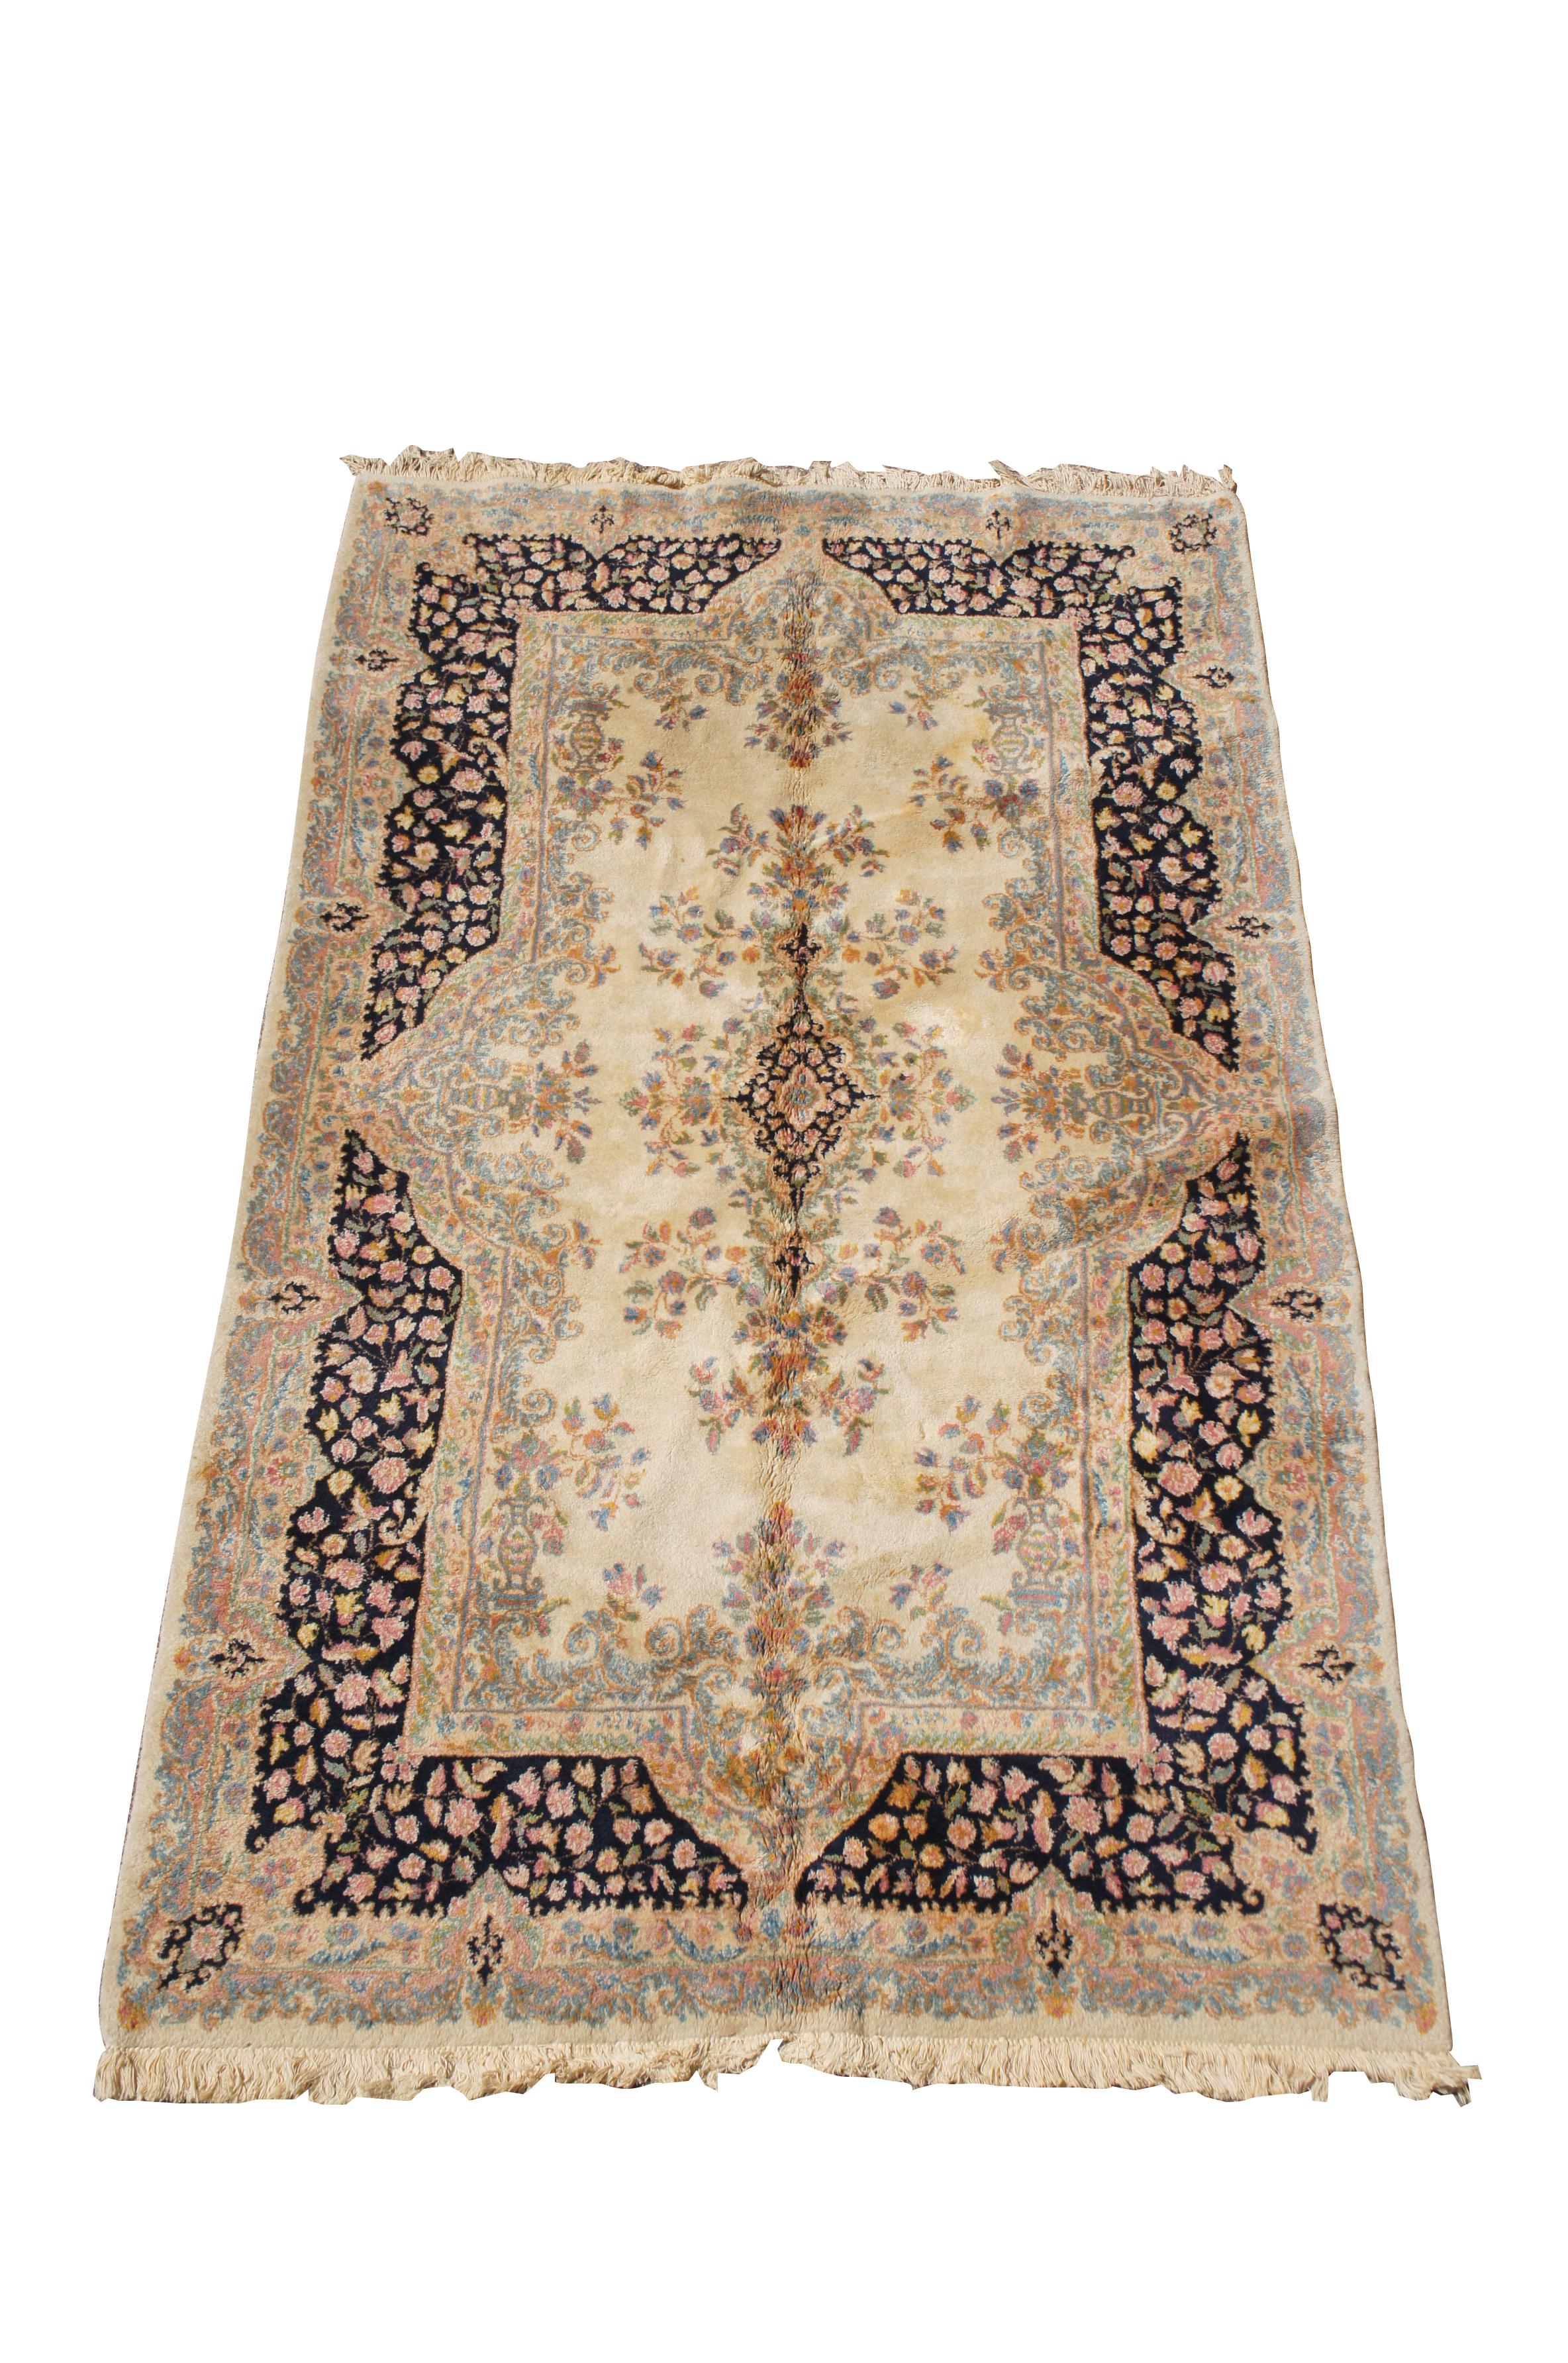 A classic French Aubusson rug, circa last half 20th century.  Features a beige foreground with light blue and navy border.  The rug is decorated with vibrant floral sprays in blue, gold, pink and orange. 225 knots per square inch

Dimensions:
59.5